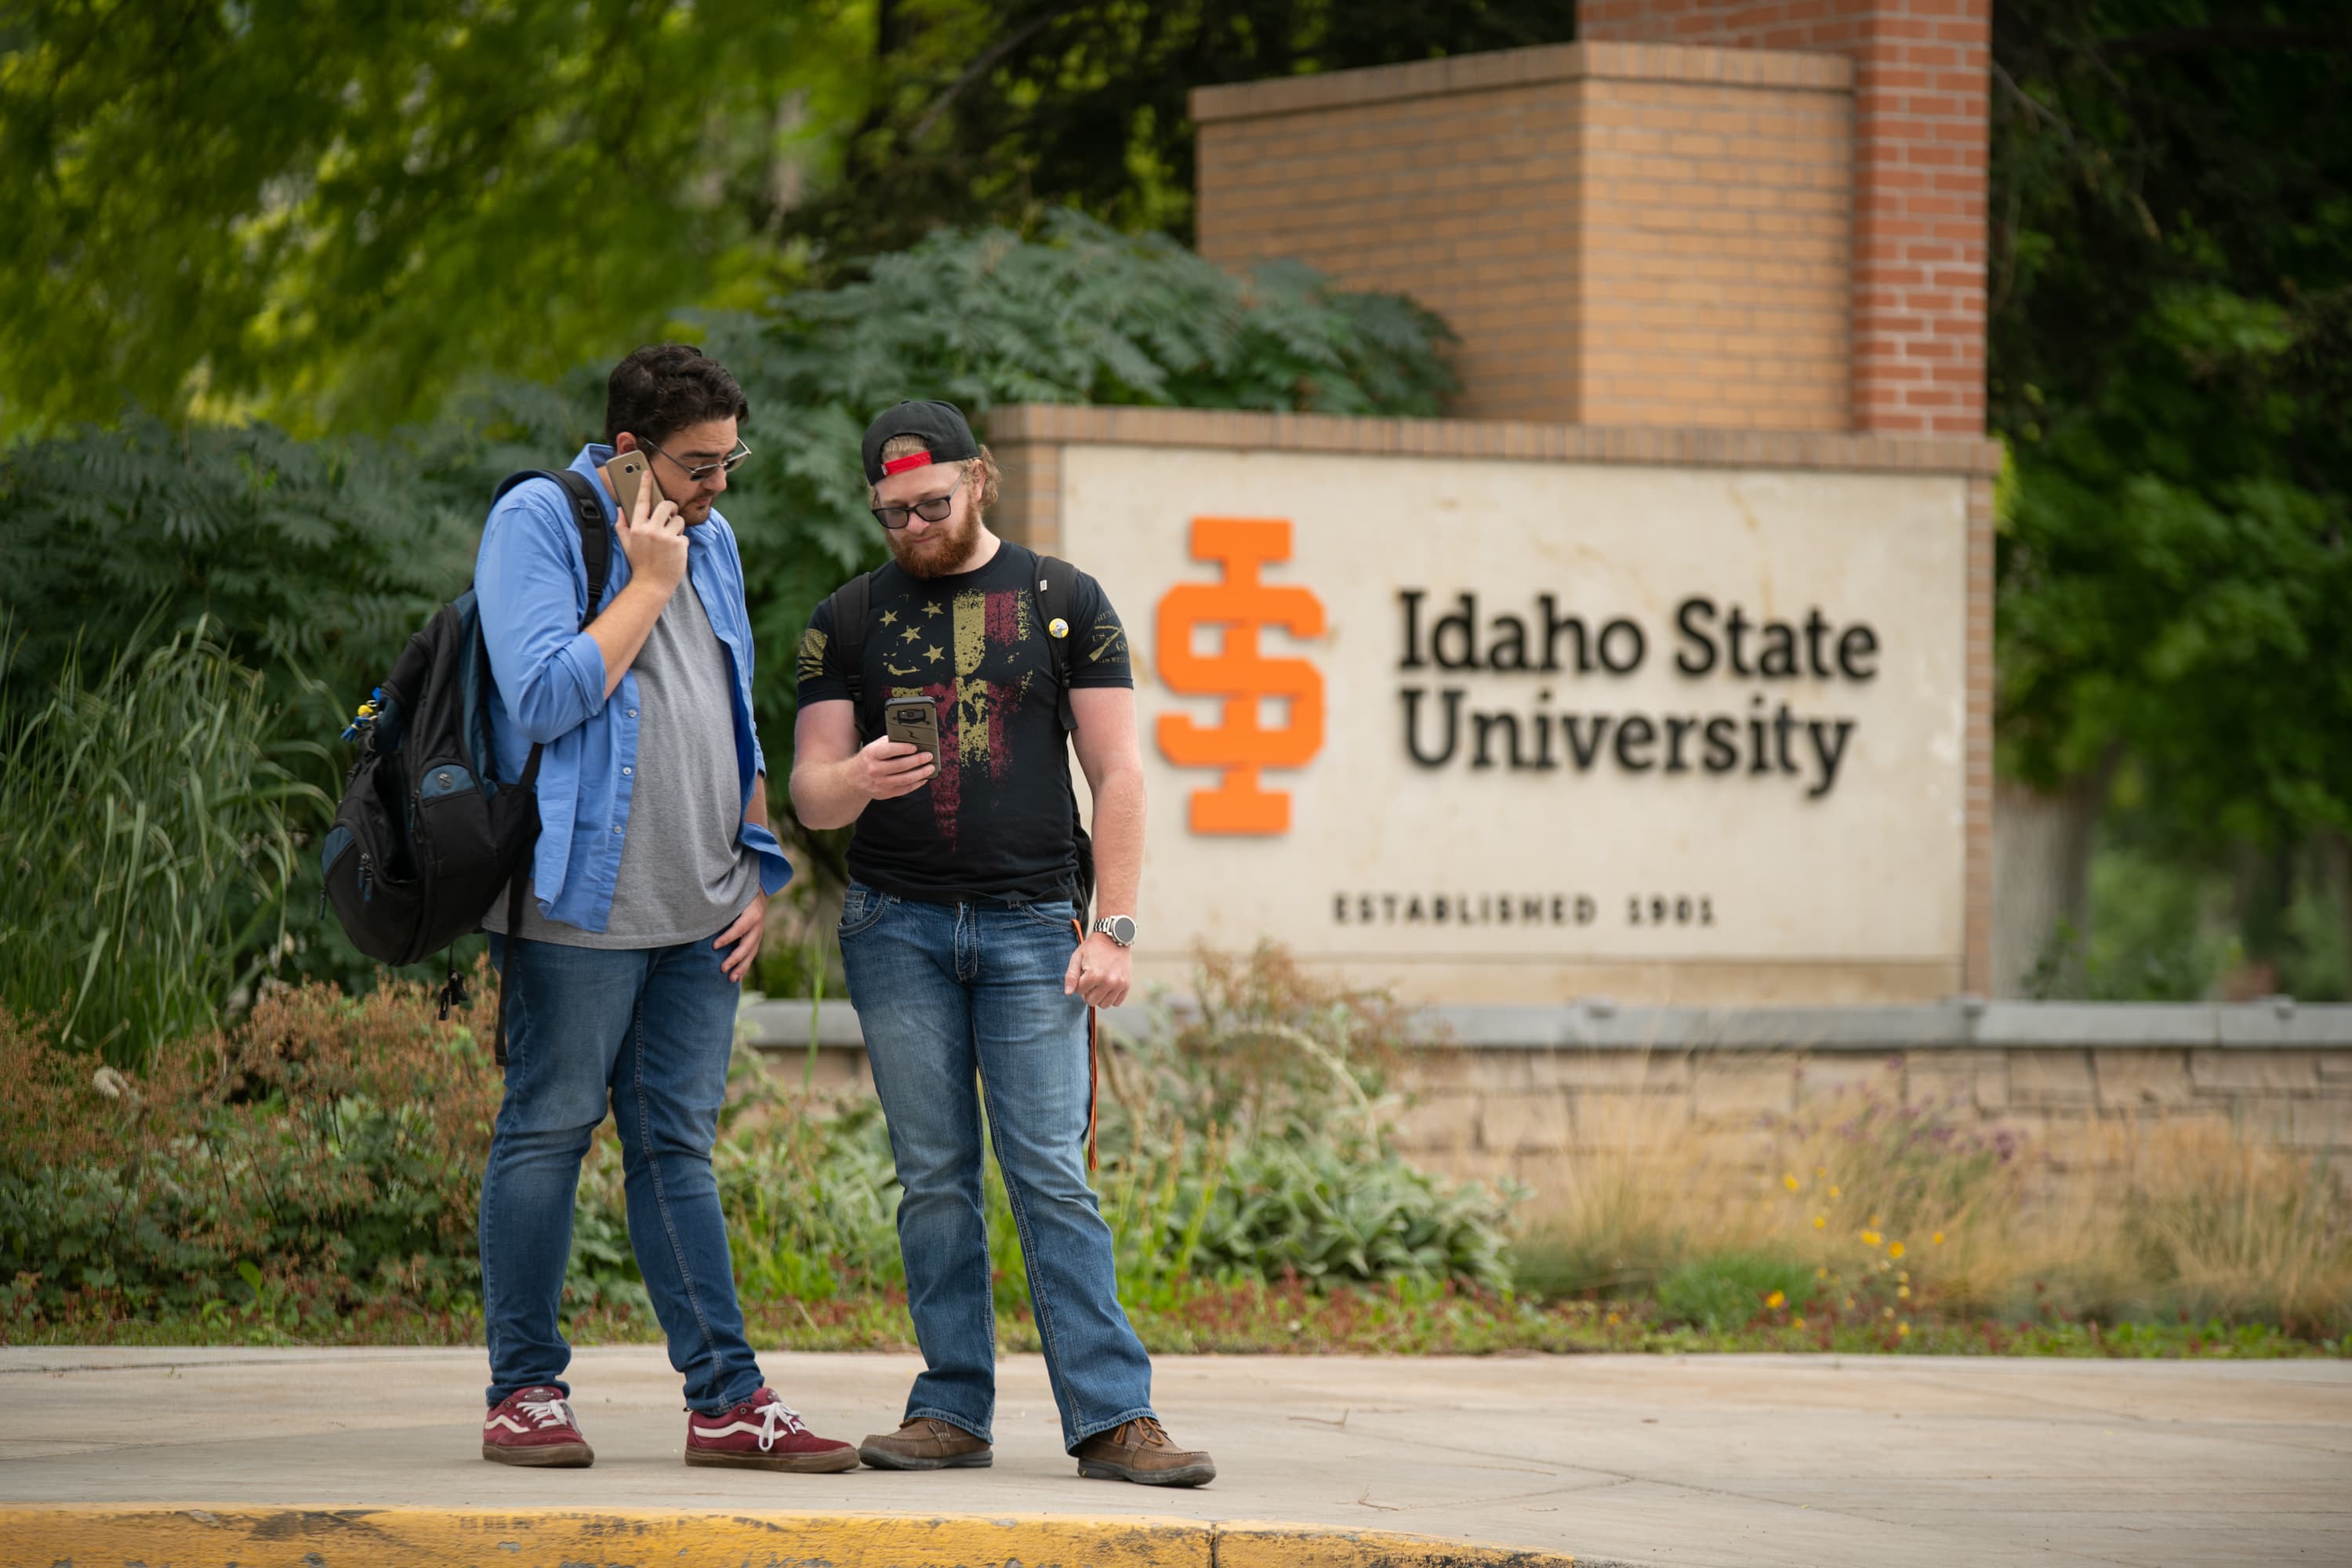 Students looking questioningly at a laptop in front of an outdoor ISU logo.